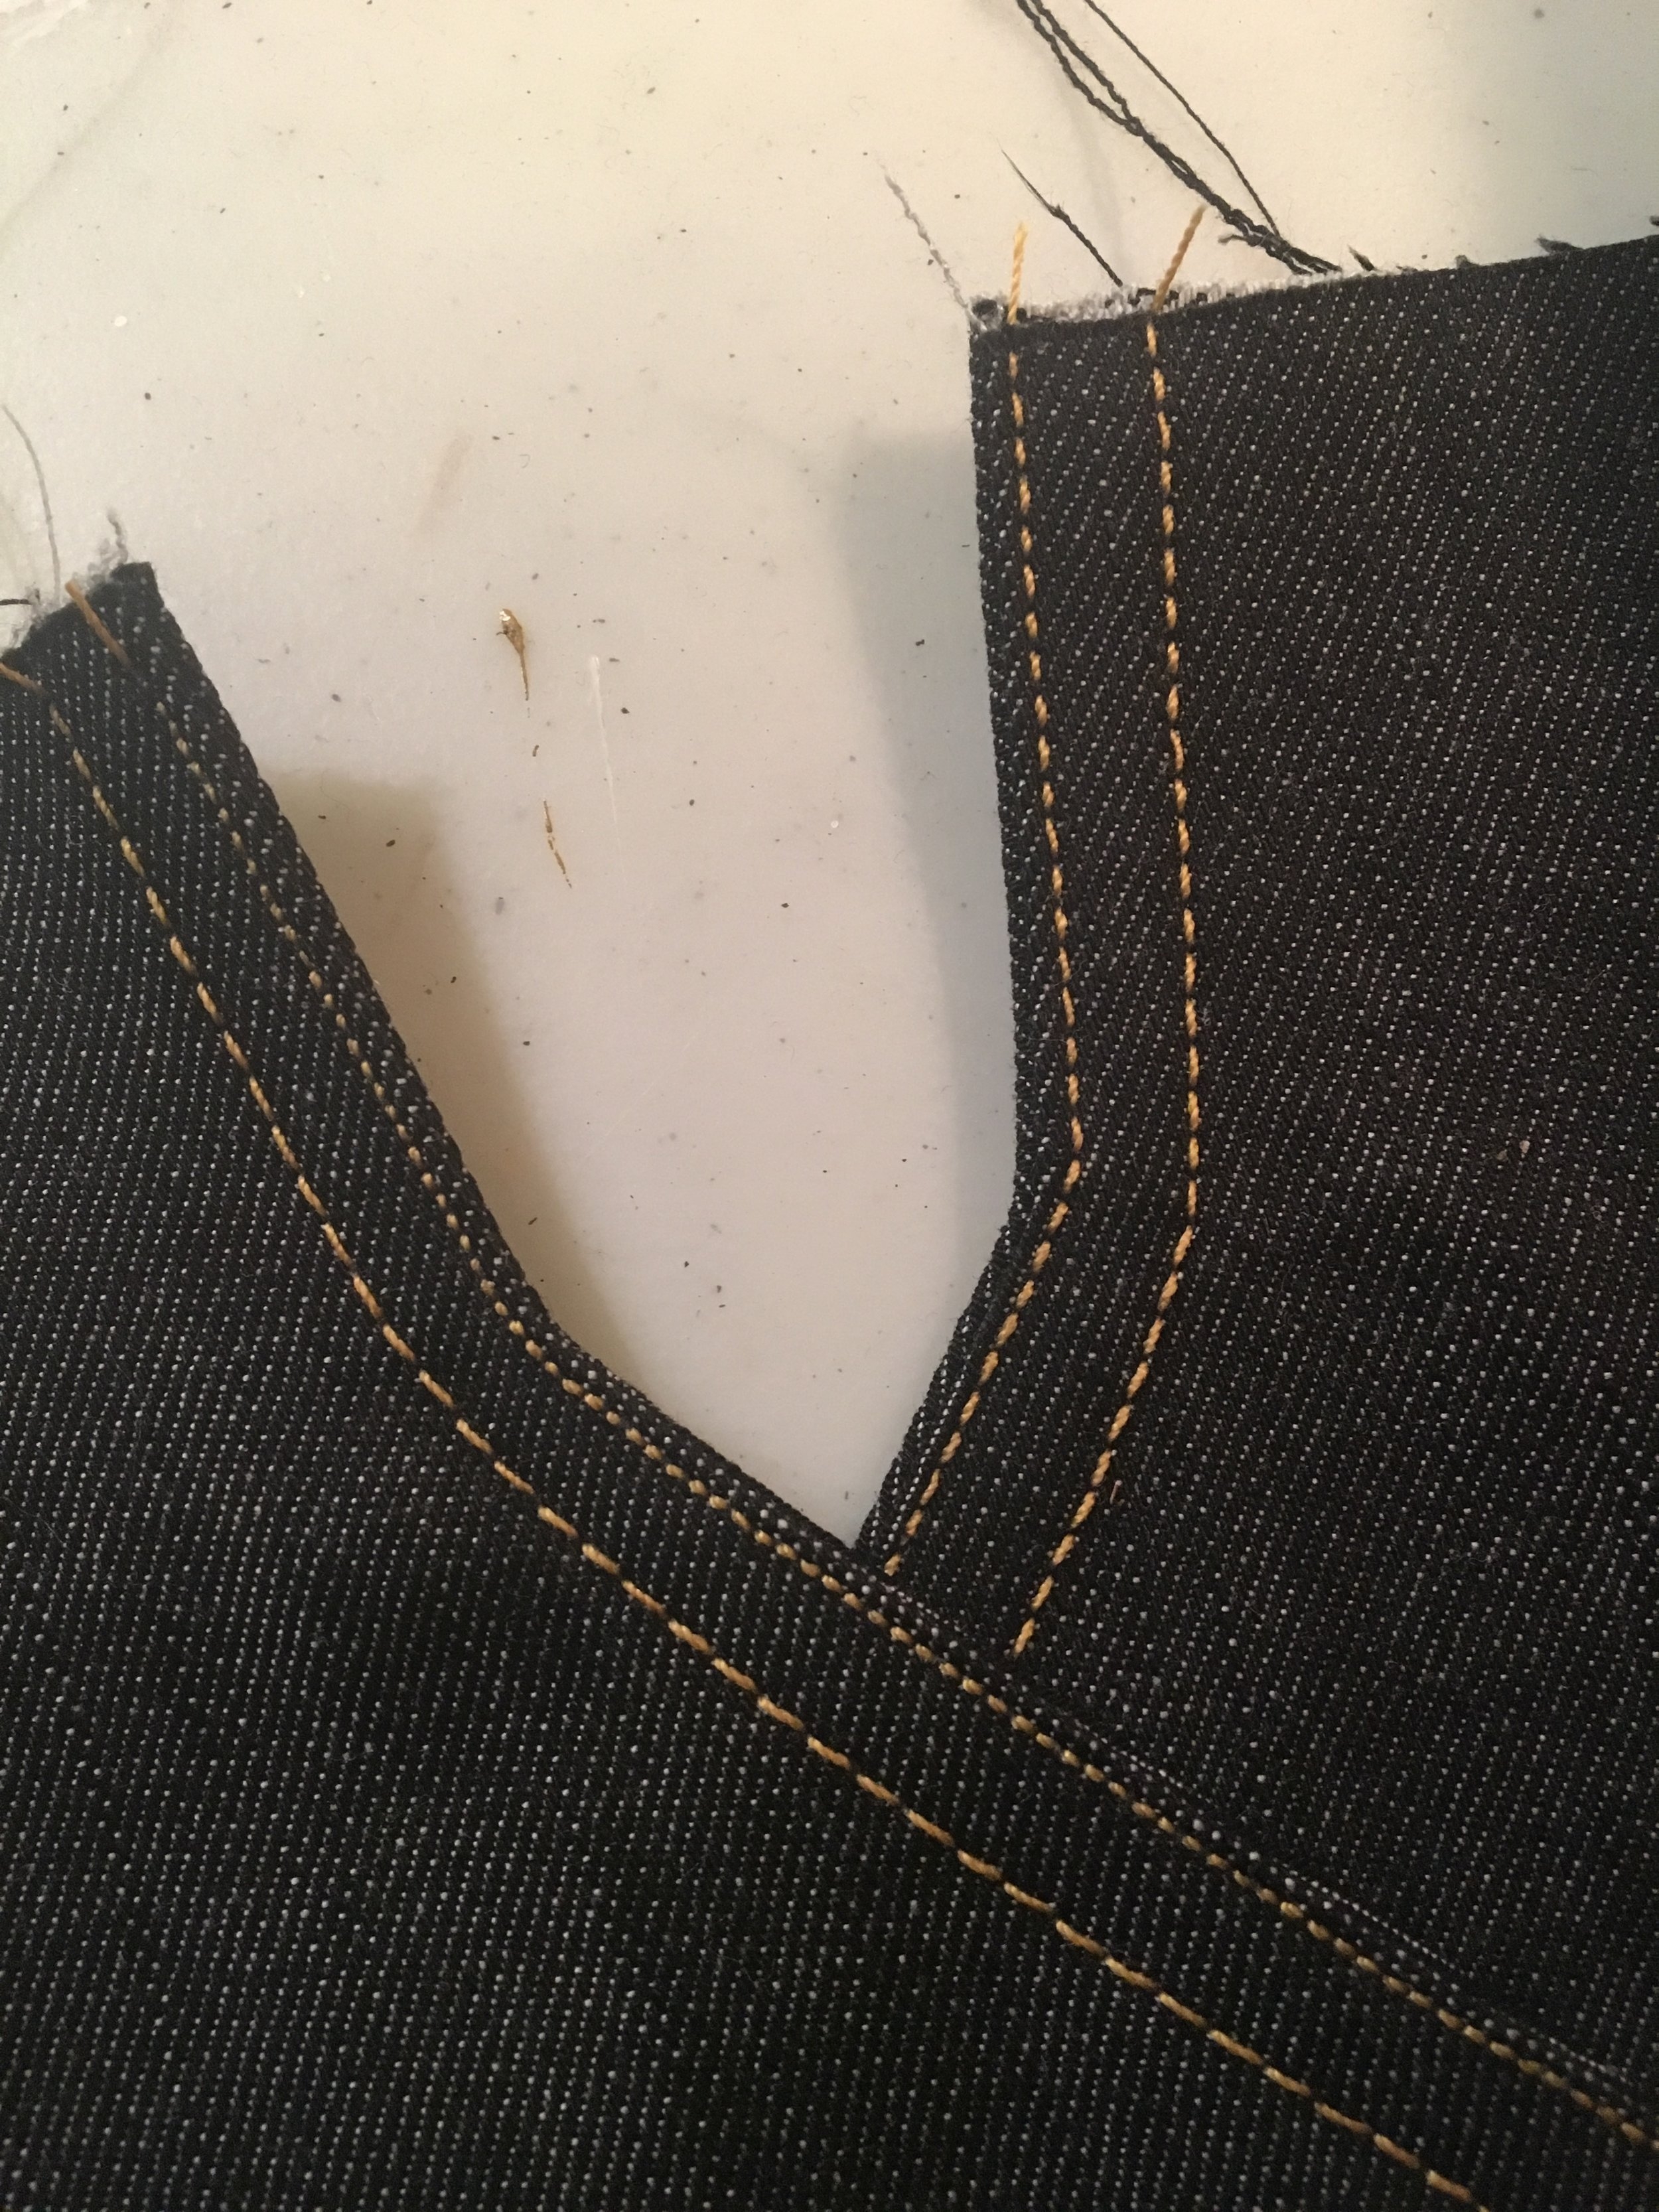 Top stitching on both pocket pieces/ pants fronts